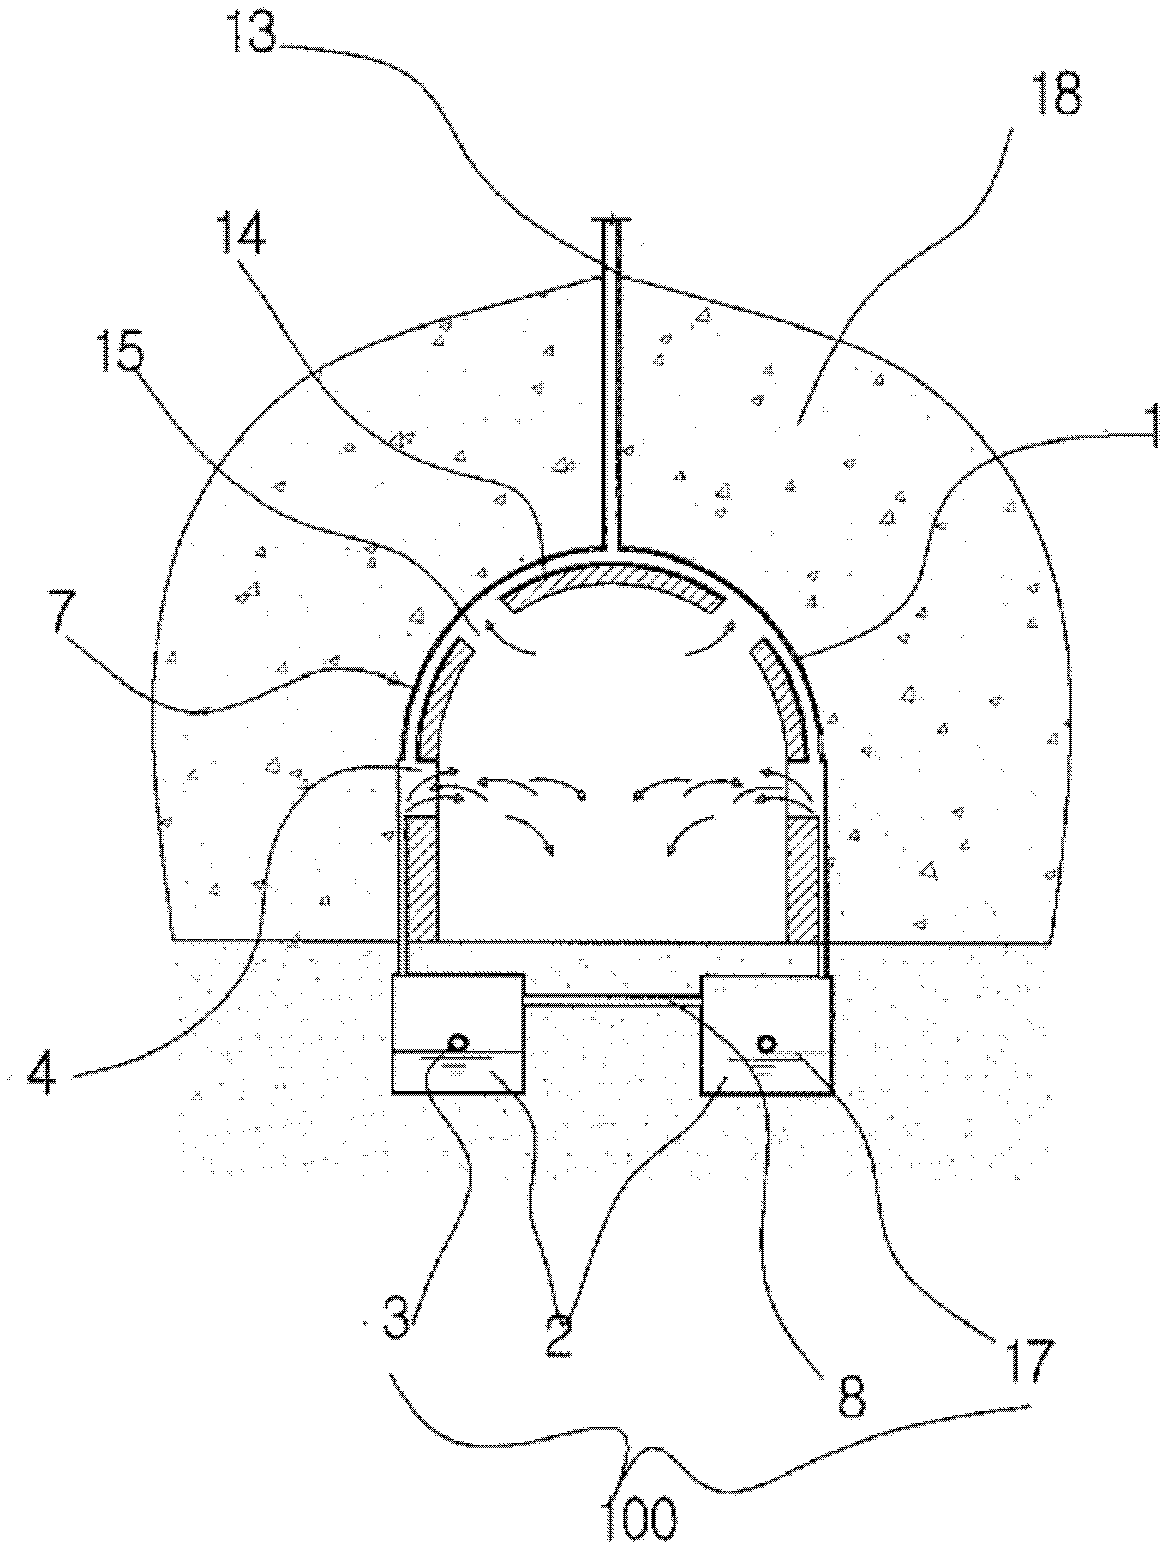 Tunnel air-exchange device using a natural air-exchange method